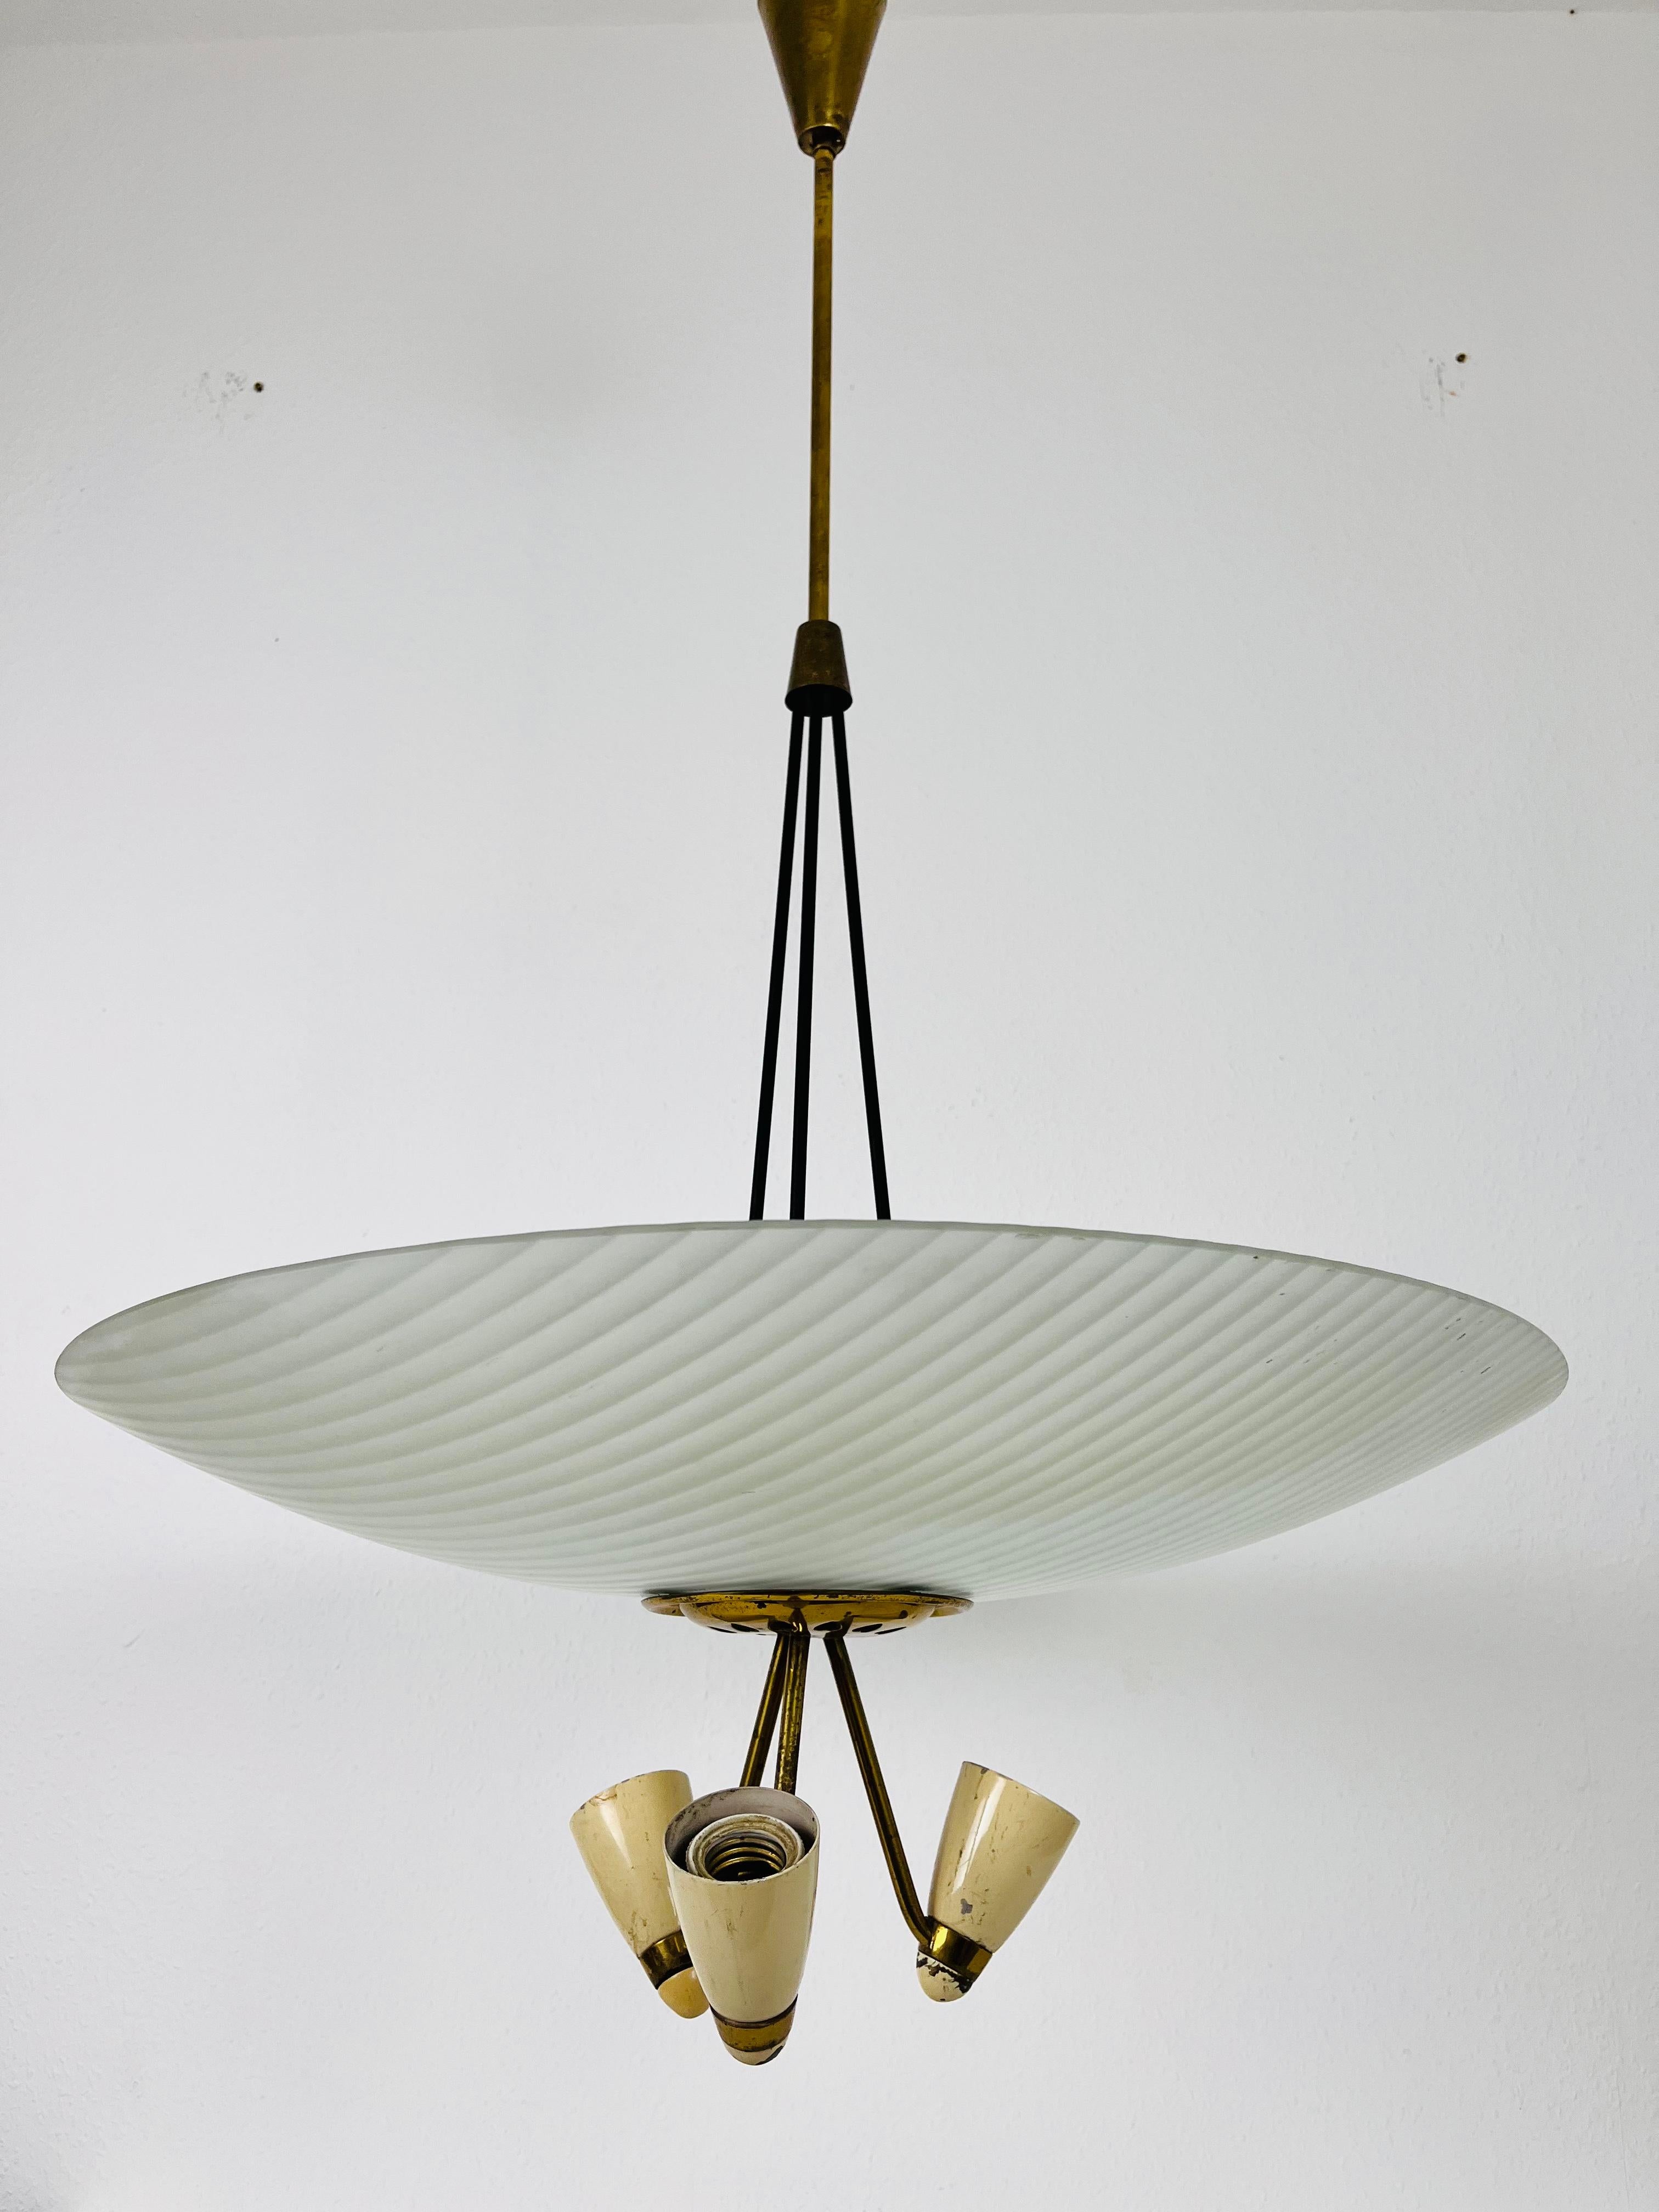 Metal Italian Midcentury Brass and Glass Chandelier, 1950s For Sale